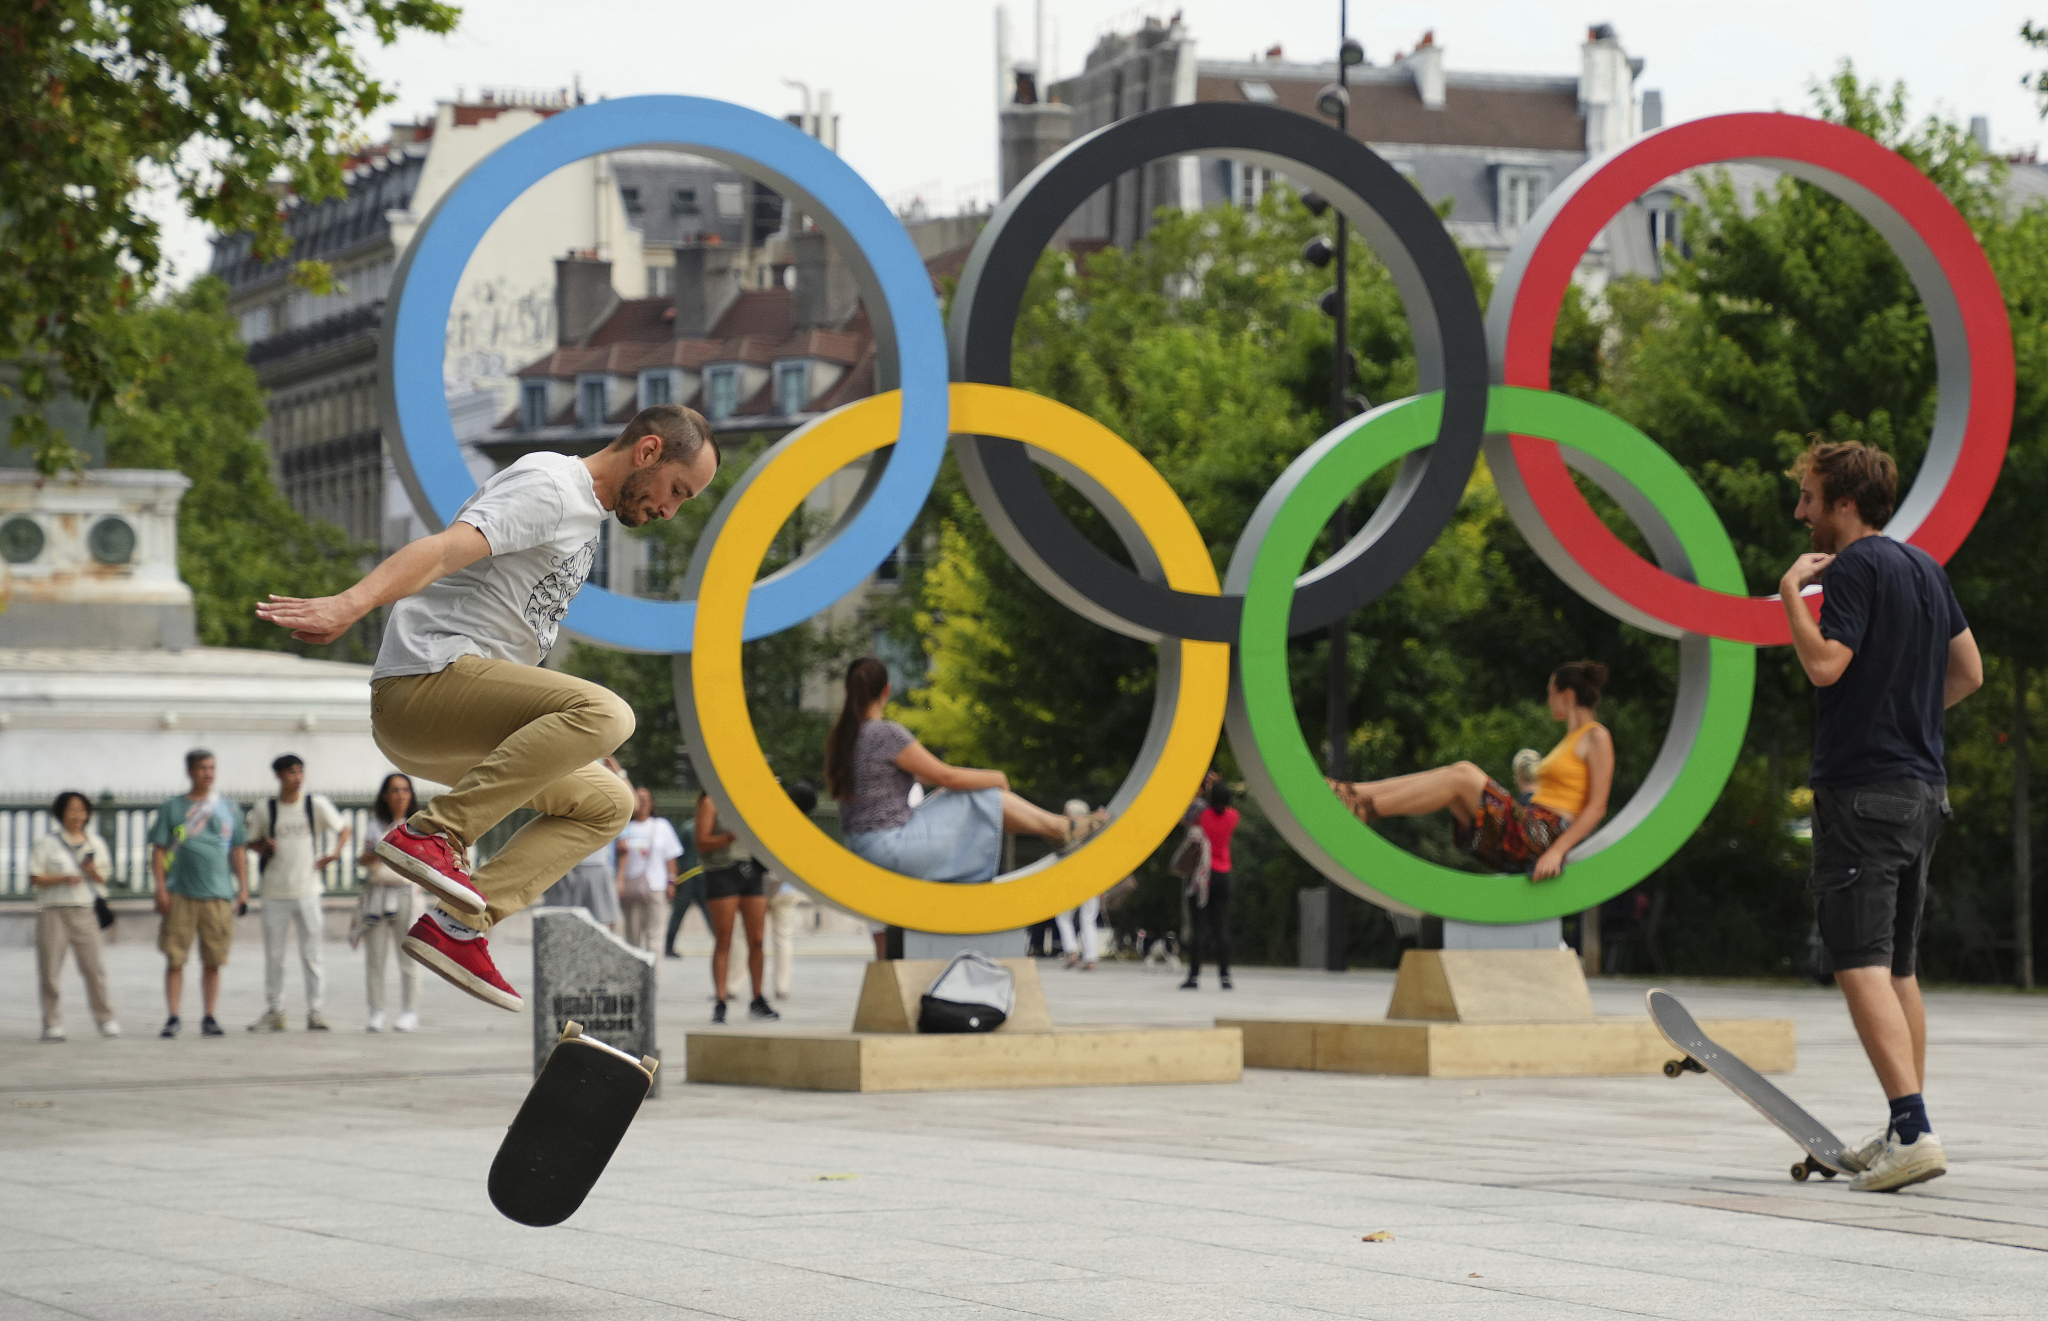 Skateboarders perform in front of the Olympic Rings at Place de la Bastille, Paris, France, July 19, 2024. /CFP